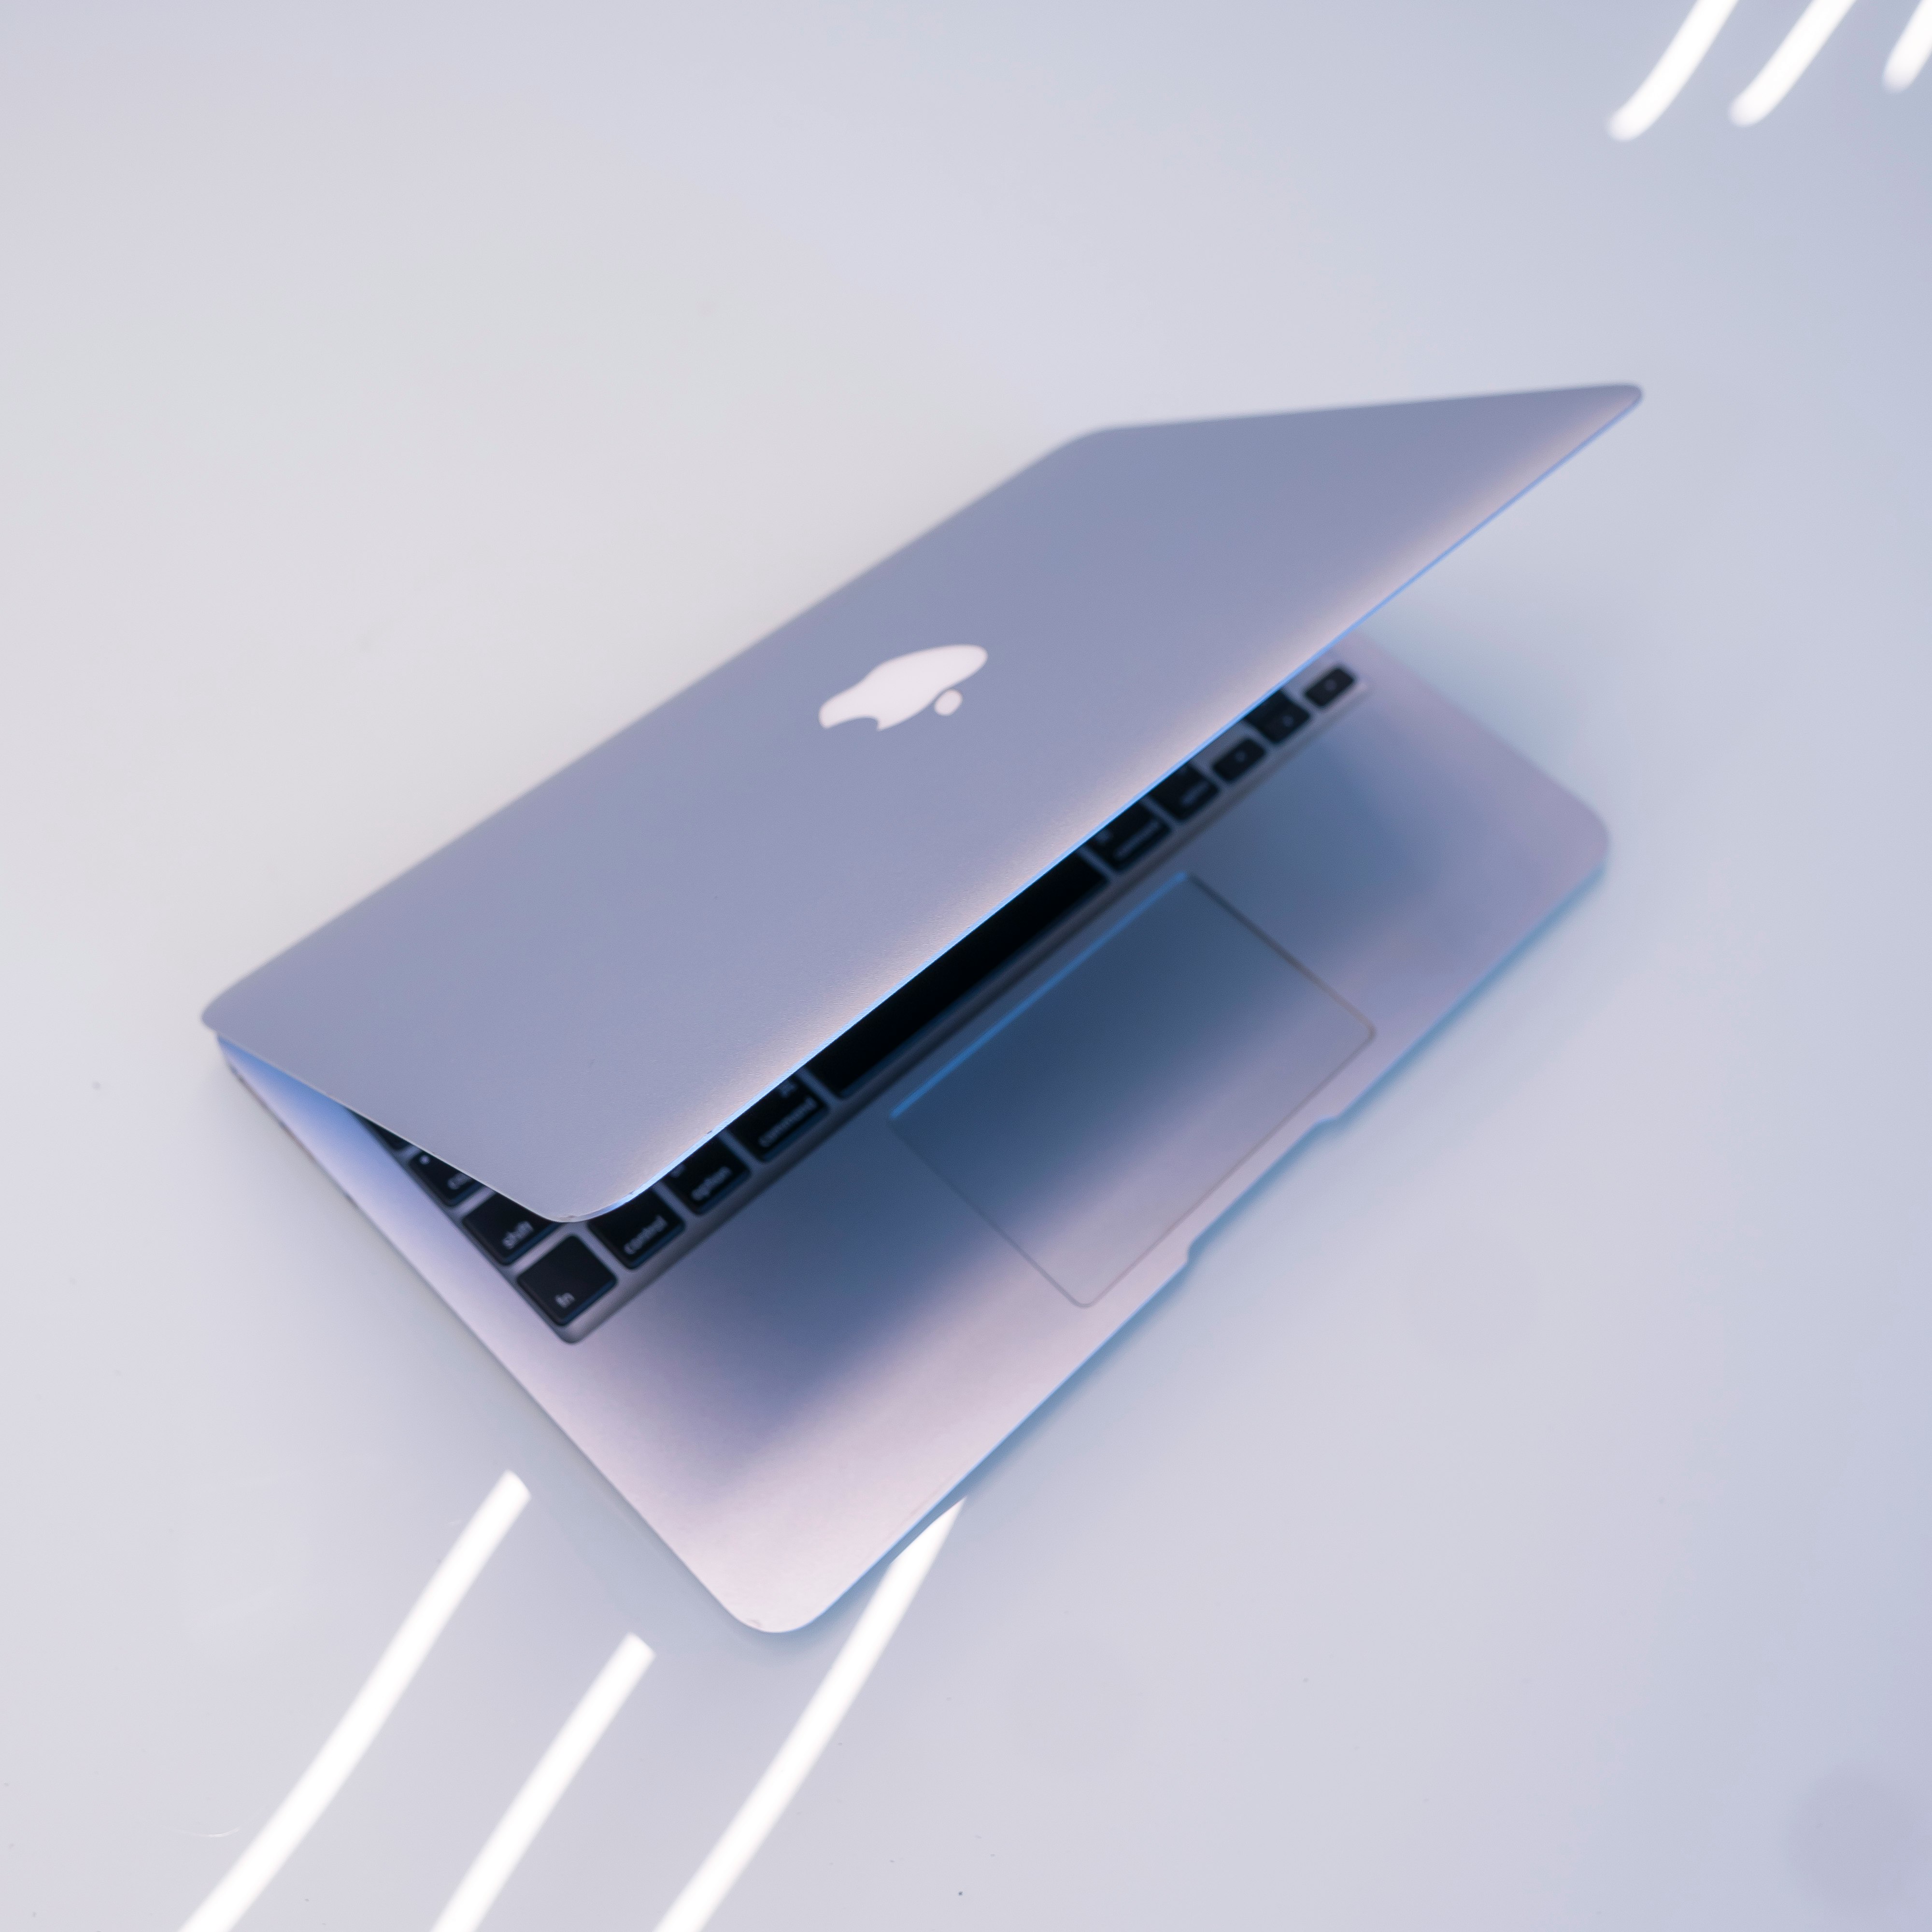 silver macbook on white table